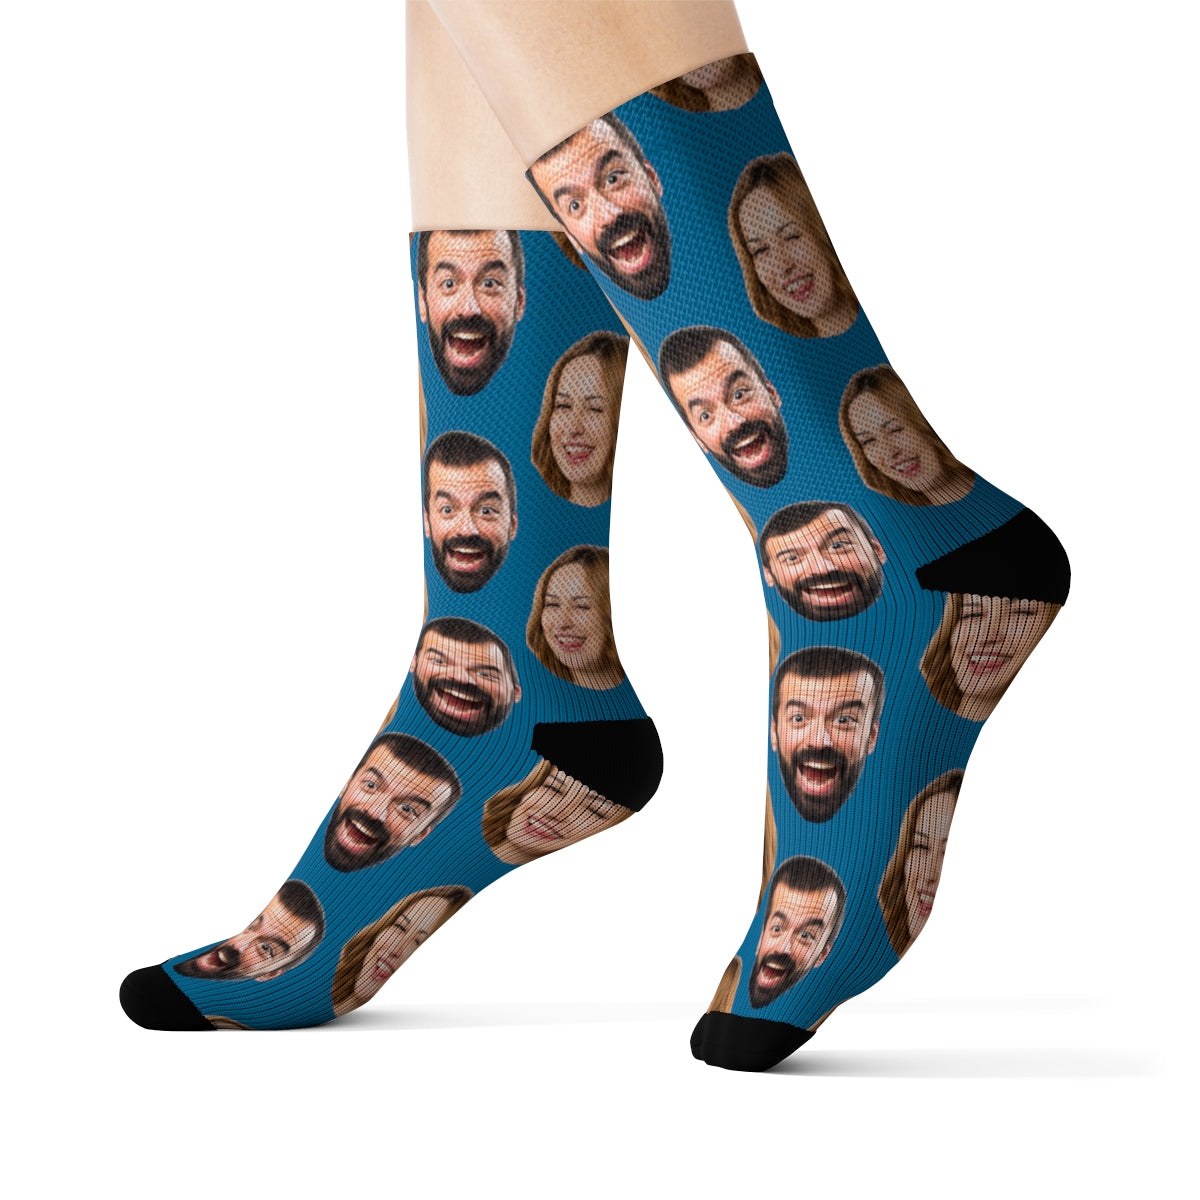 Friends Multi Face On Socks - Upload Multiple Faces on a Pair of